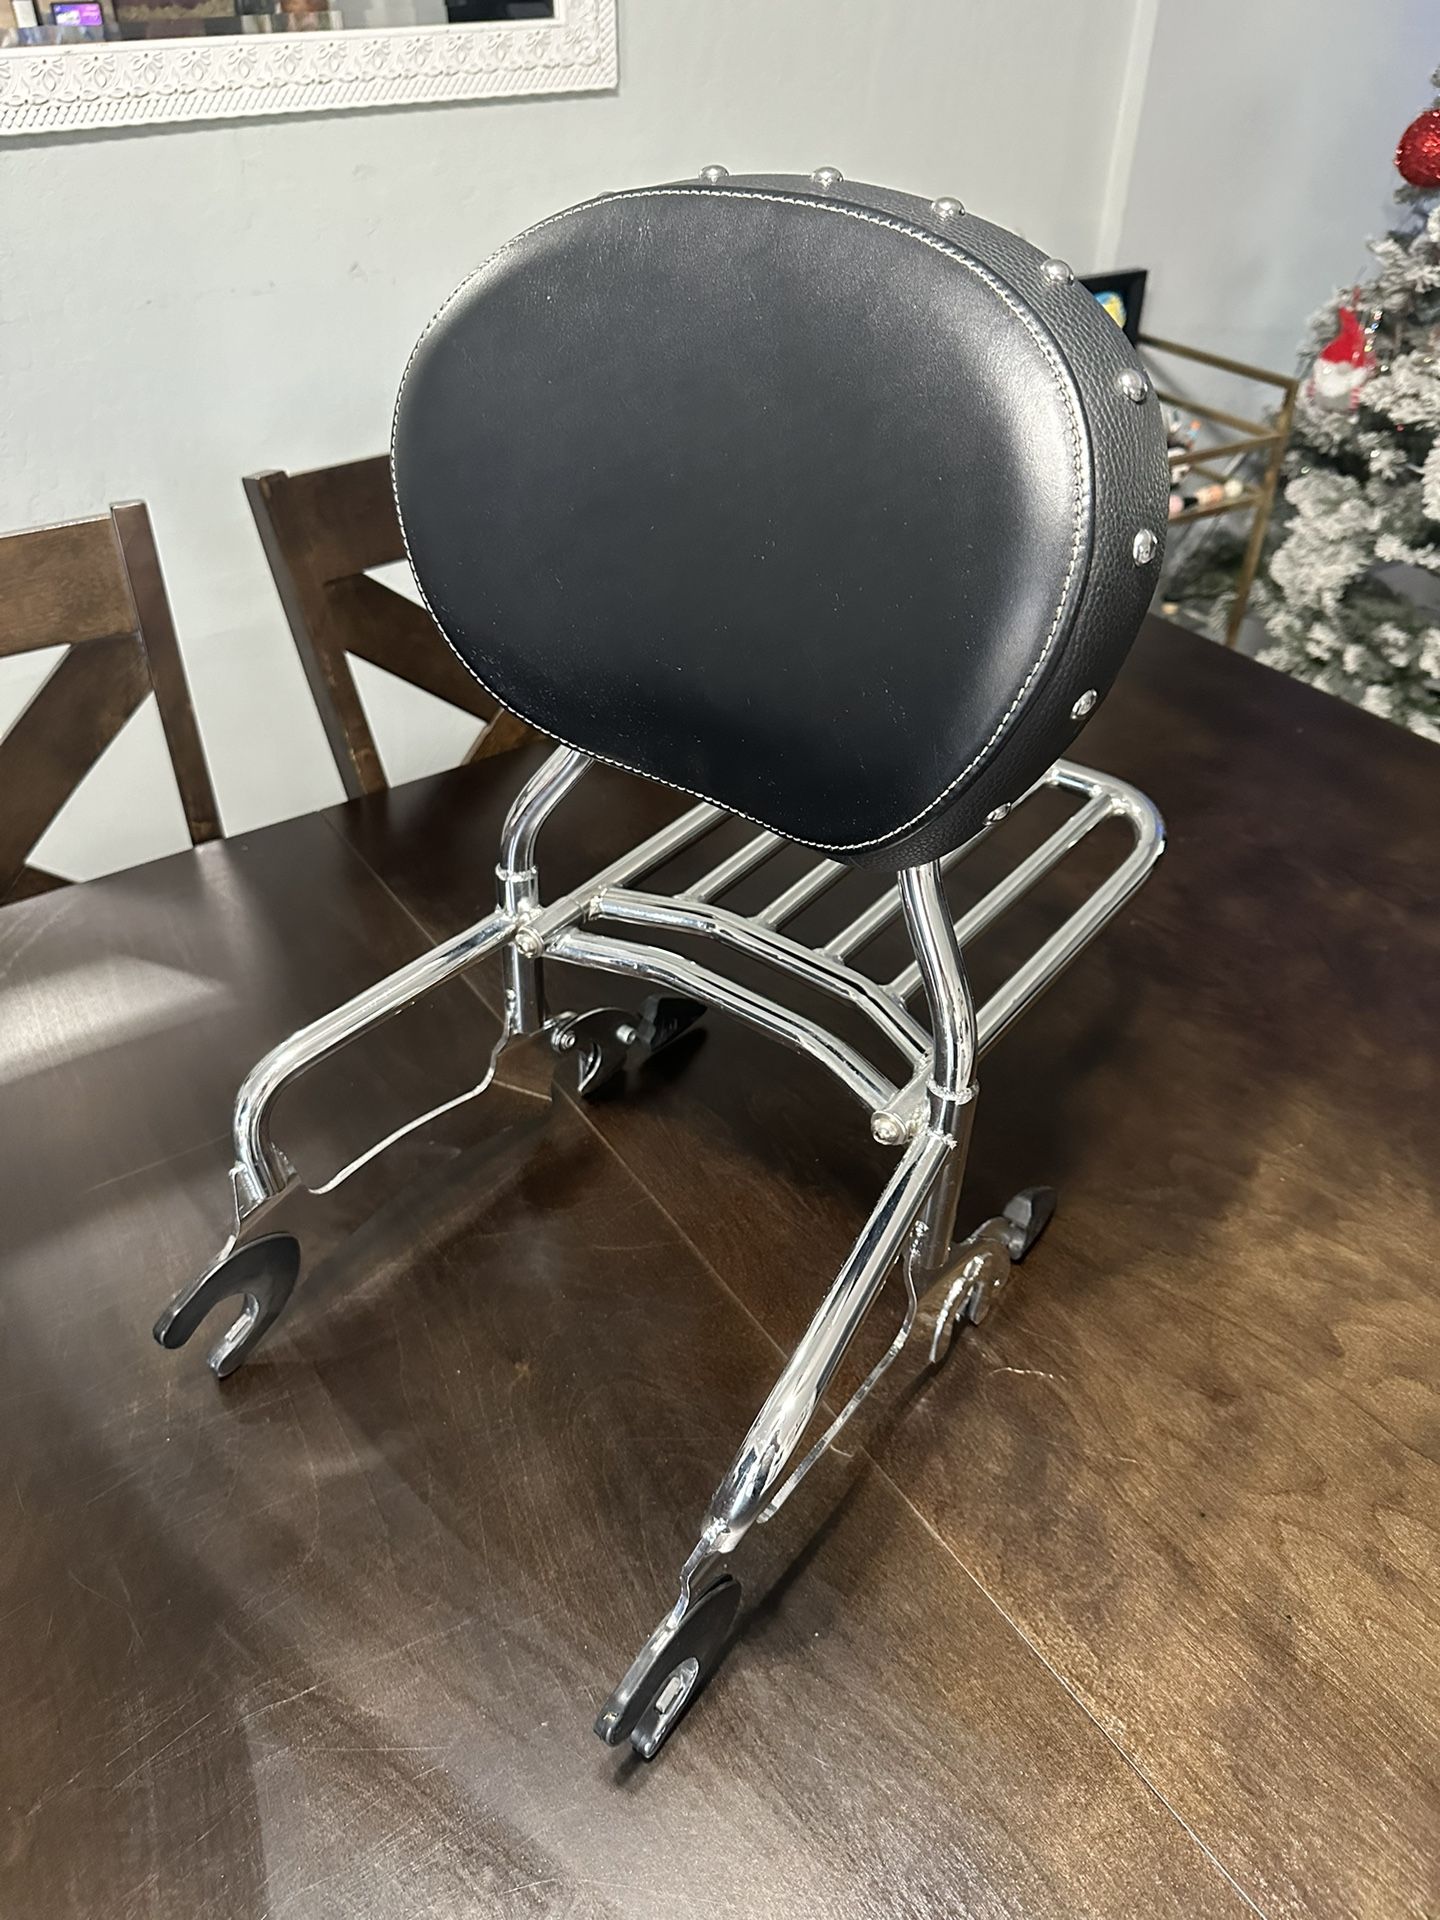 Indian Challenger Passenger Backrest With Luggage Rack